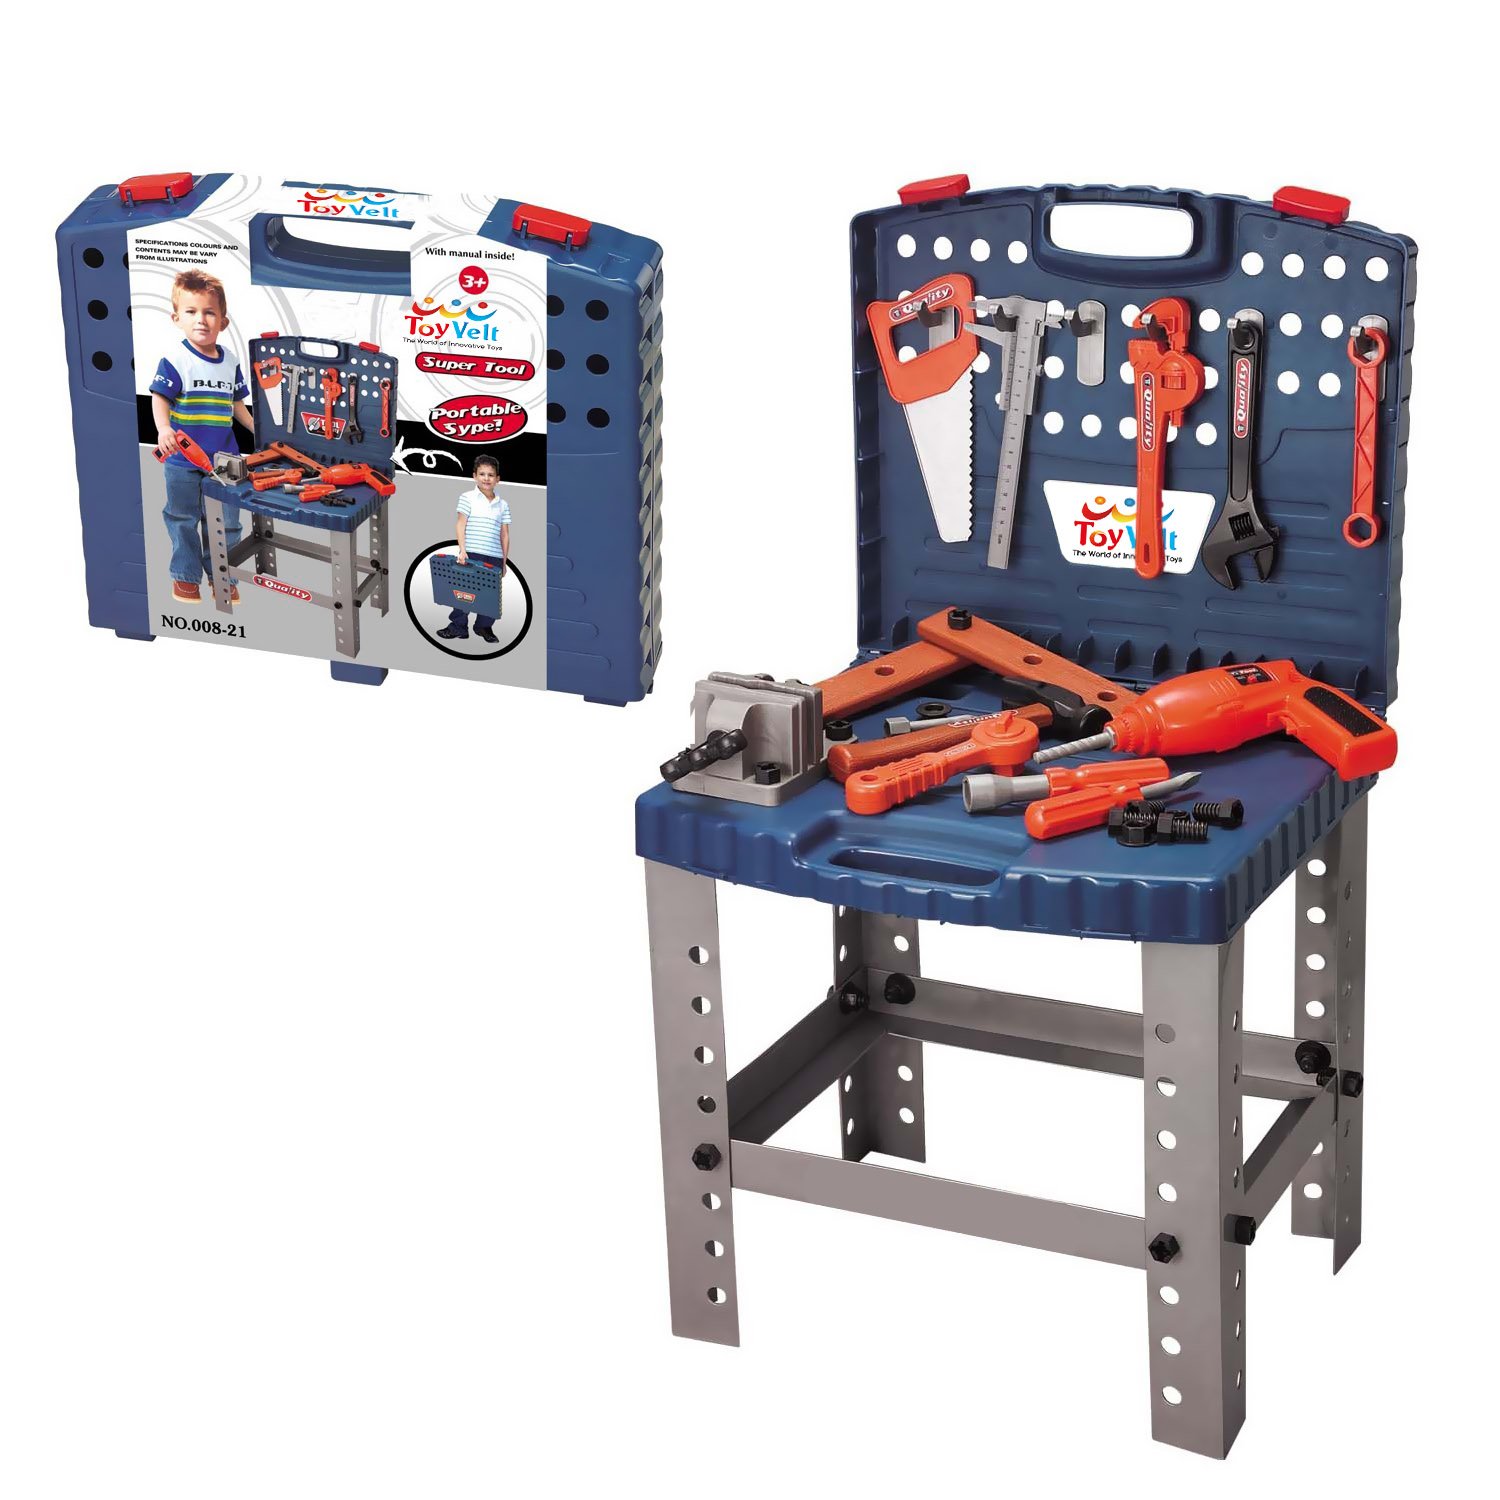 Top 9 Best Kids Toy Tool Bench Reviews in 2022 6